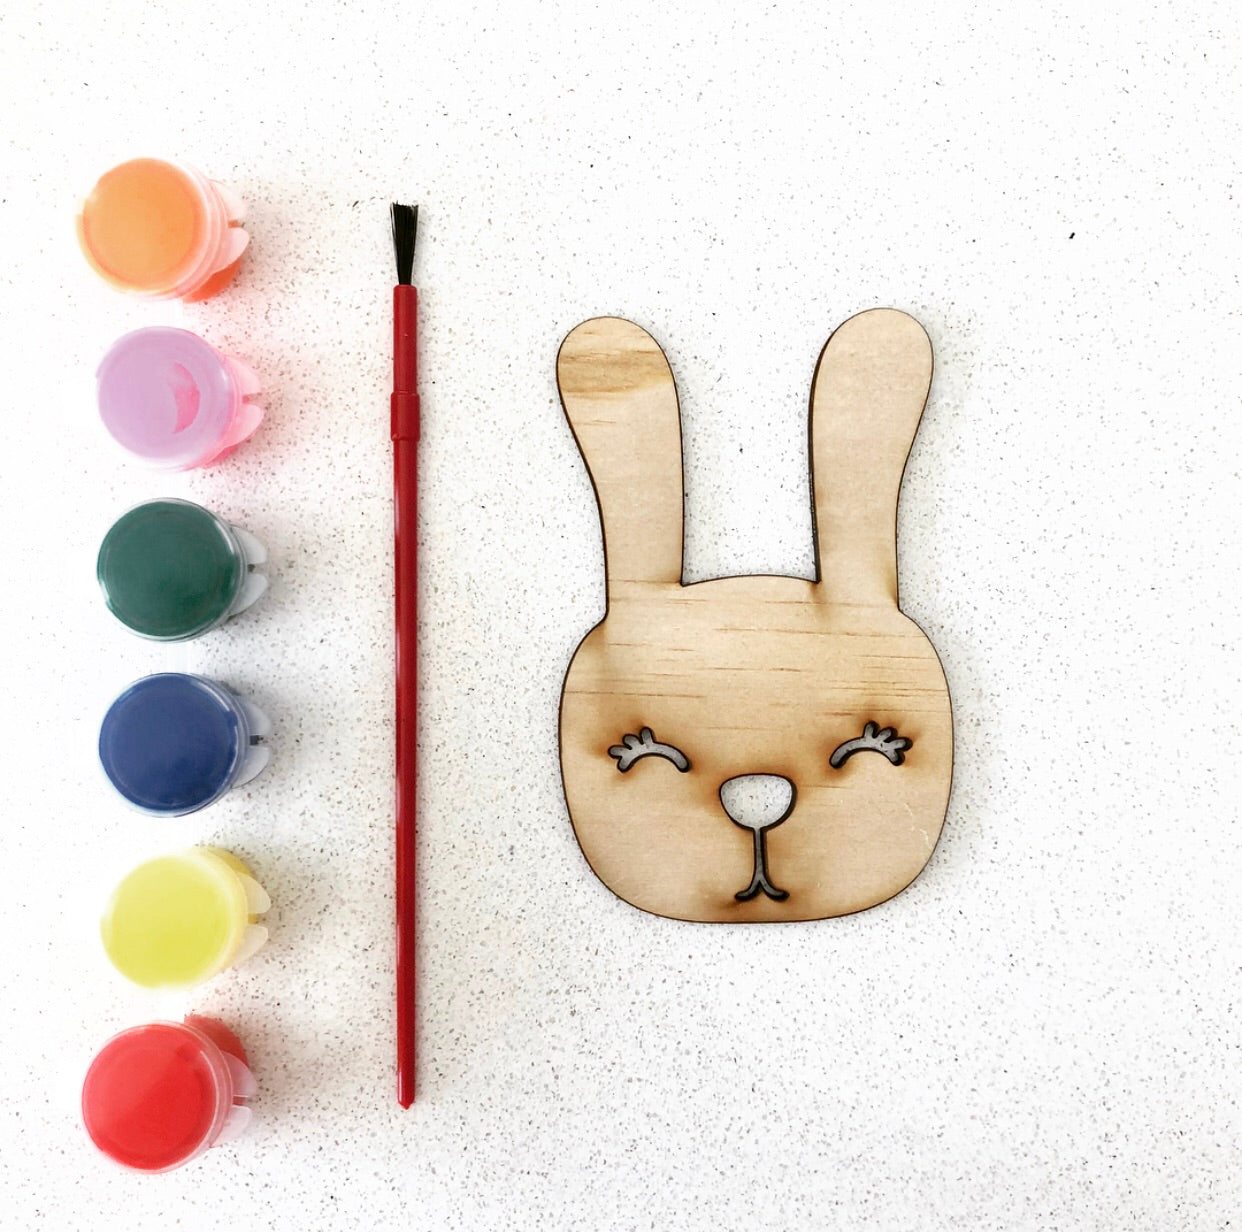 The Paintable Easter Decorations